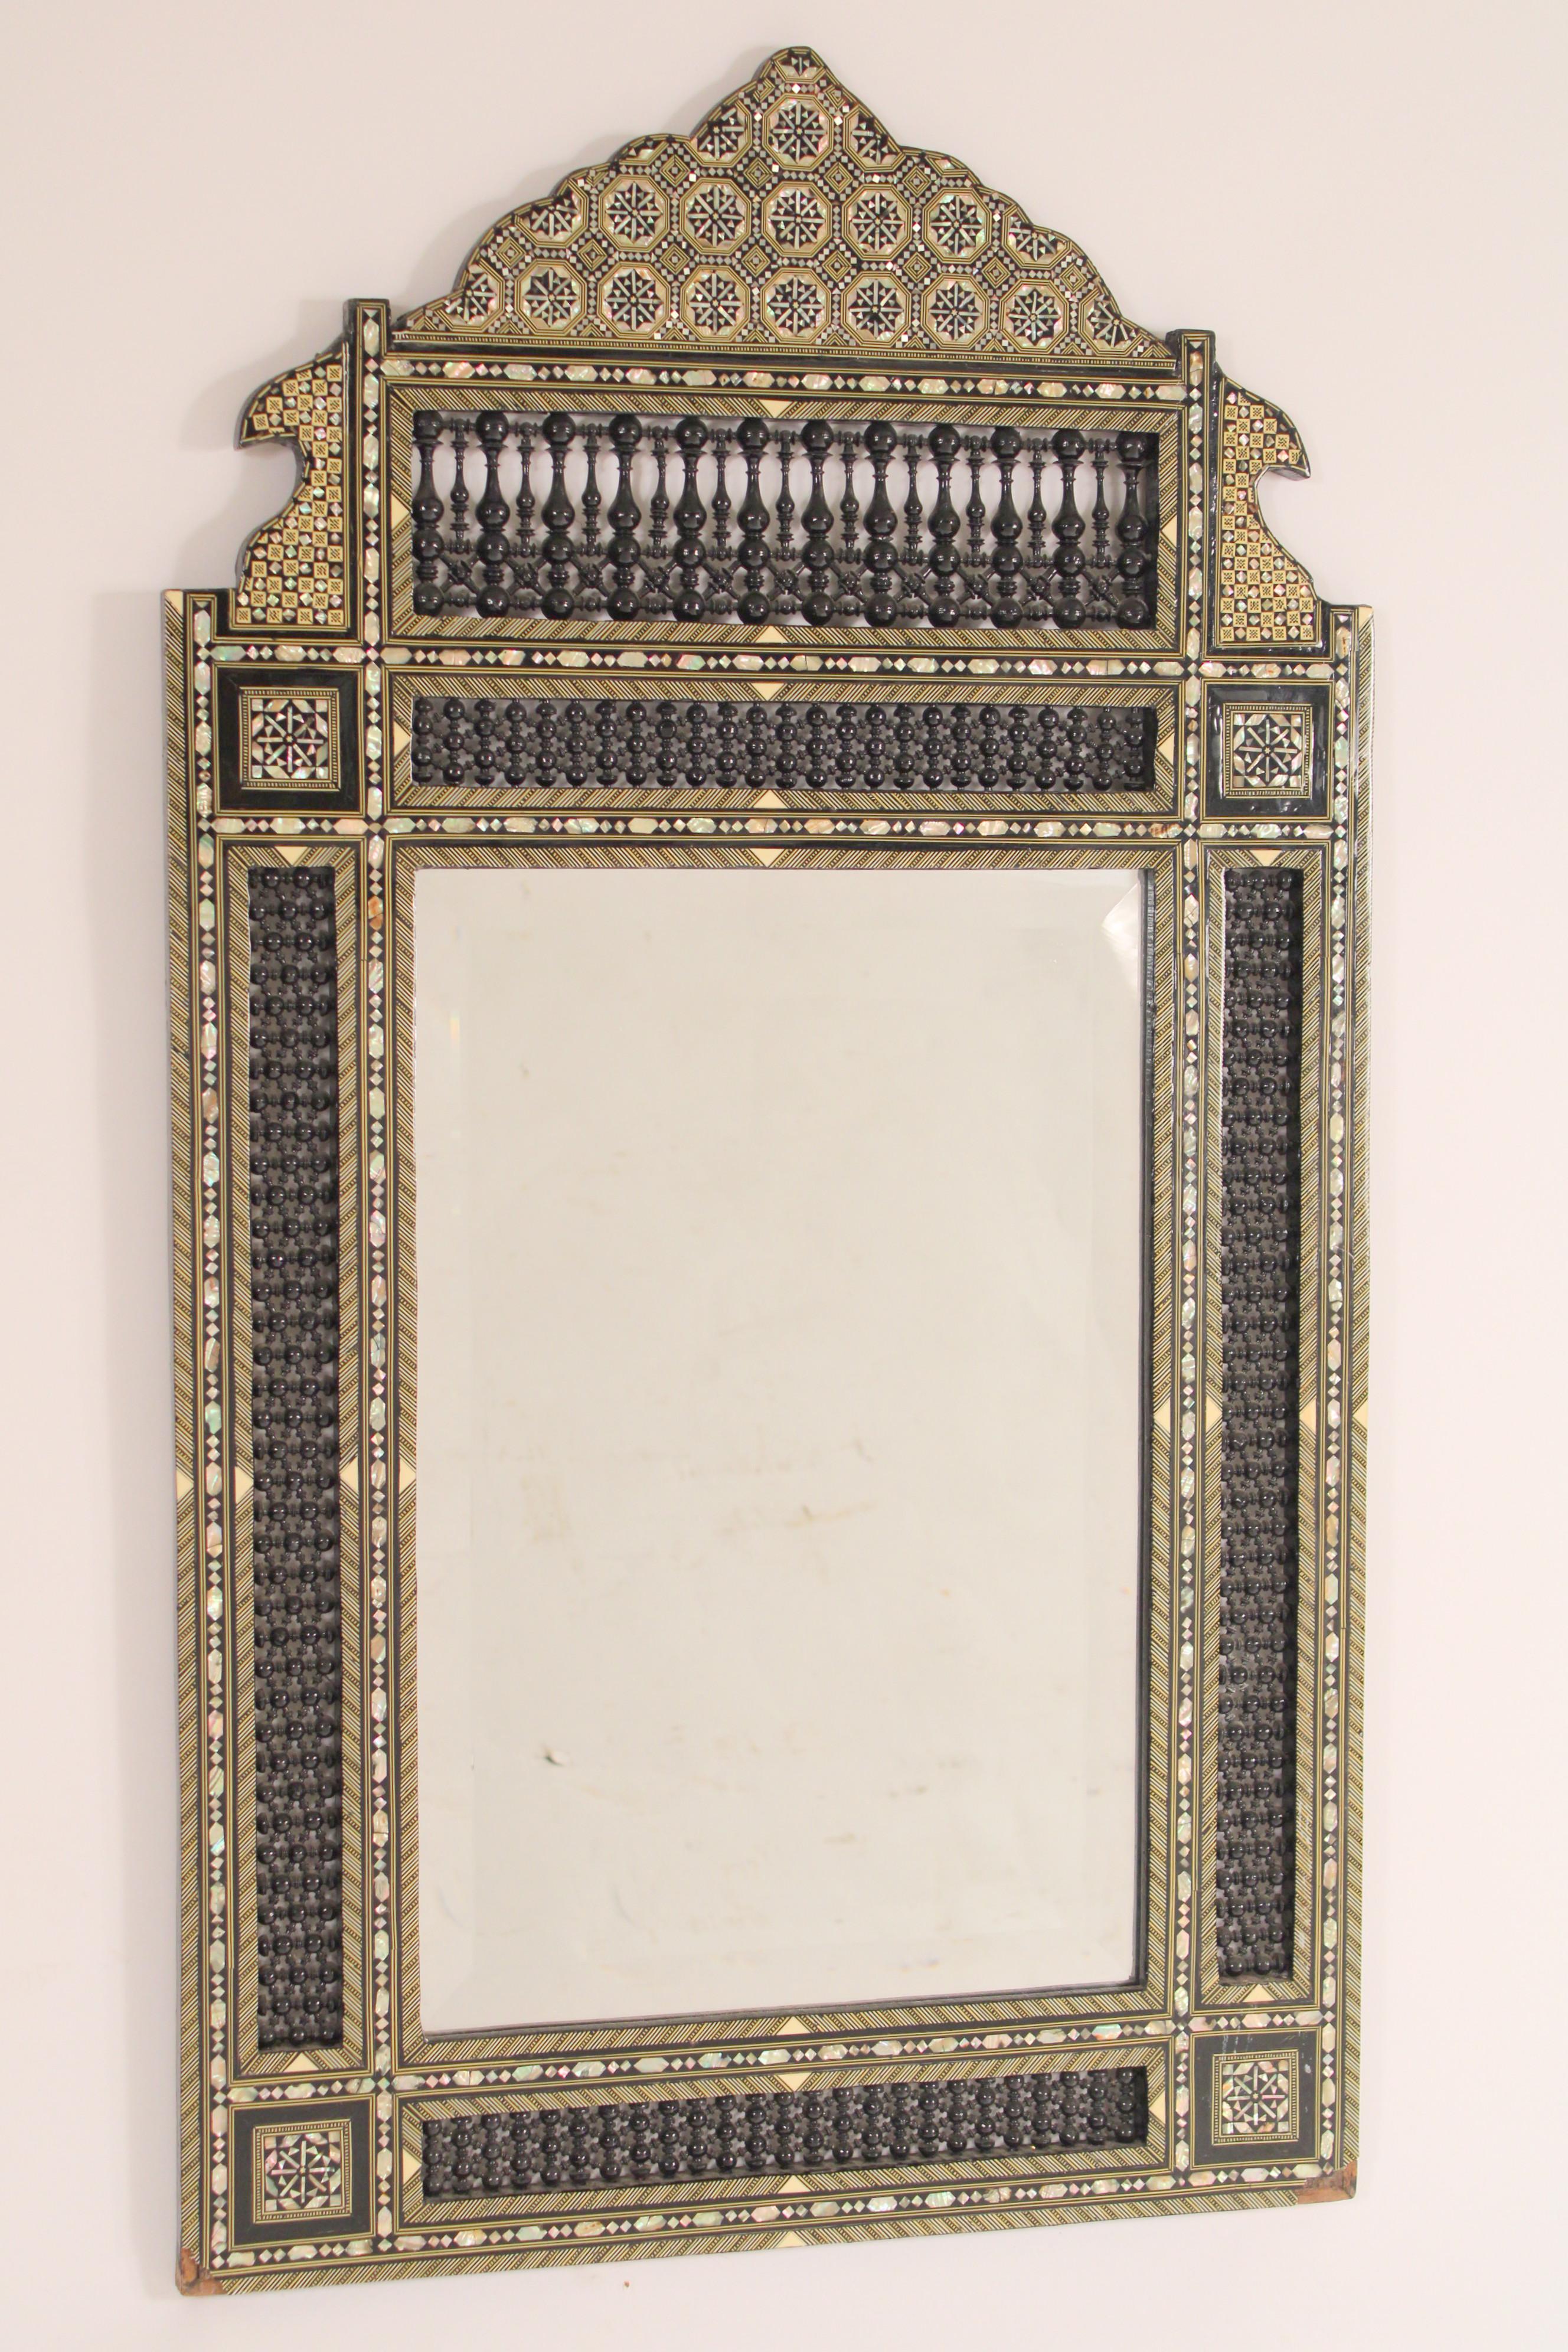 Middle Eastern mother of pearl and bone inlaid mirror, late 20th century. With mother of pearl and bone inlay. Turned decorations on top, sides and bottom. Very intricate detailed inlay on this mirror.